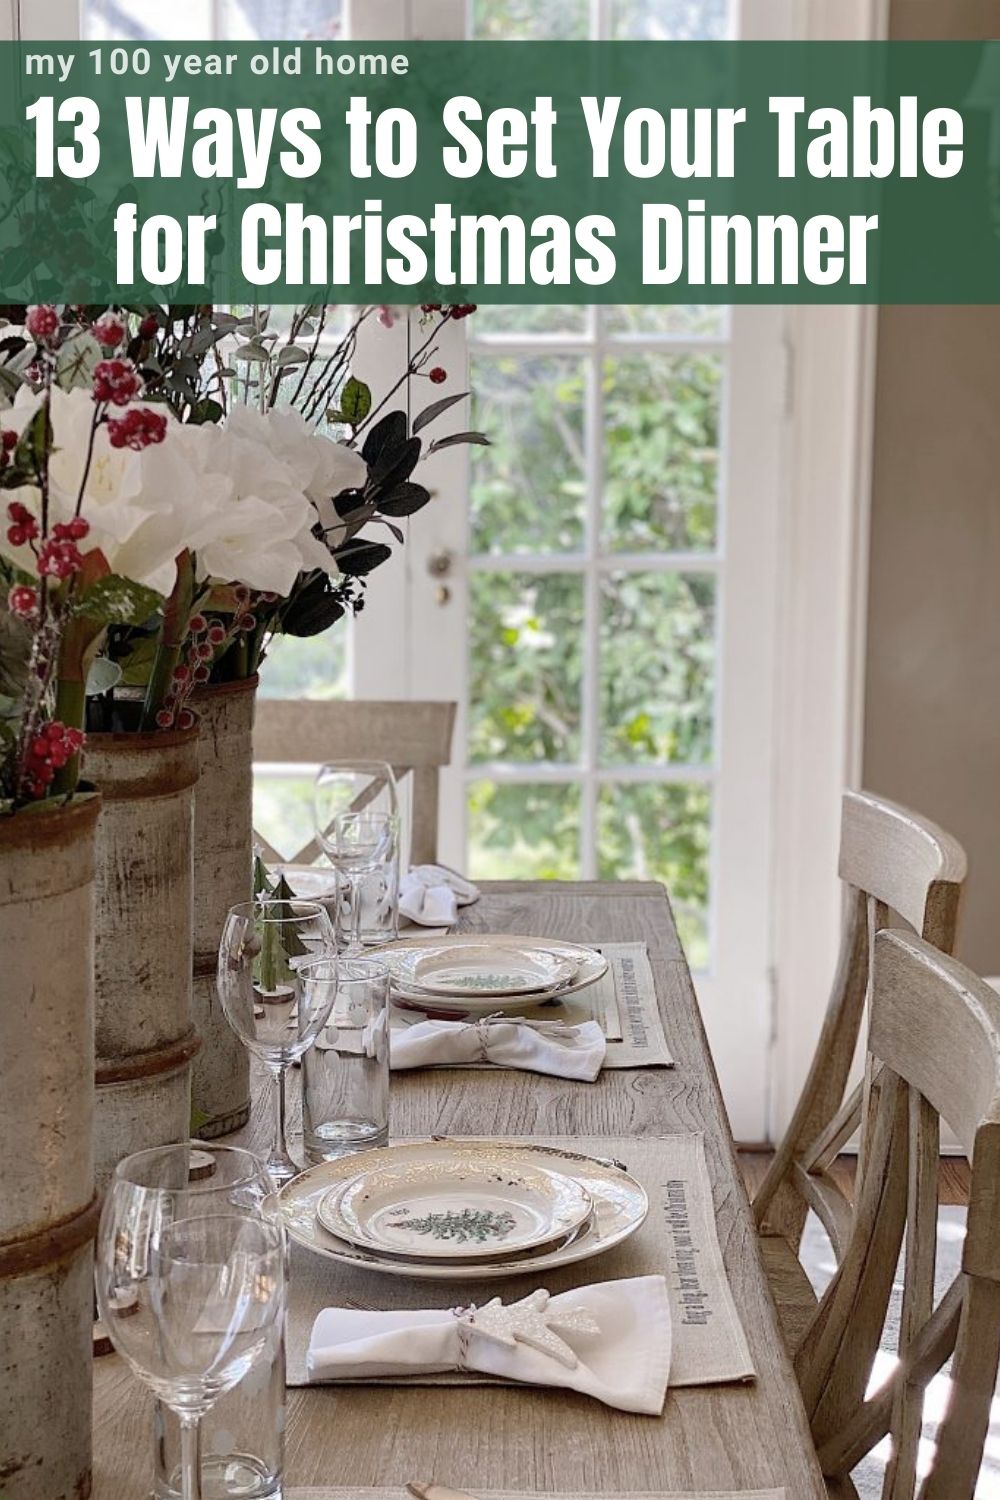 Today I am sharing 13 ways to set your table for Christmas. I hope these ideas inspire you to have fun setting your table!